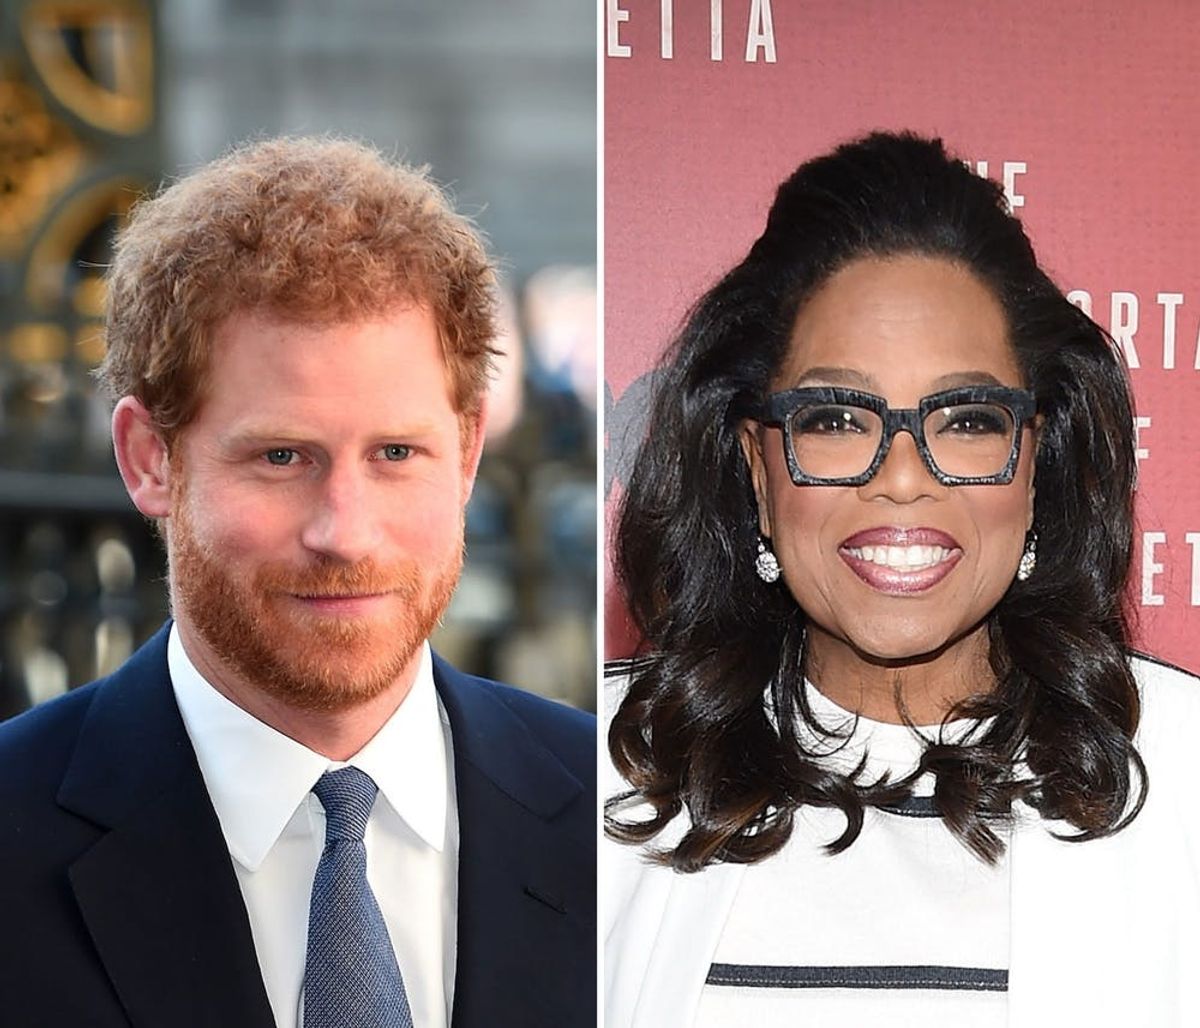 Prince Harry and Oprah Winfrey Are Teaming Up for a New Series on Apple TV+